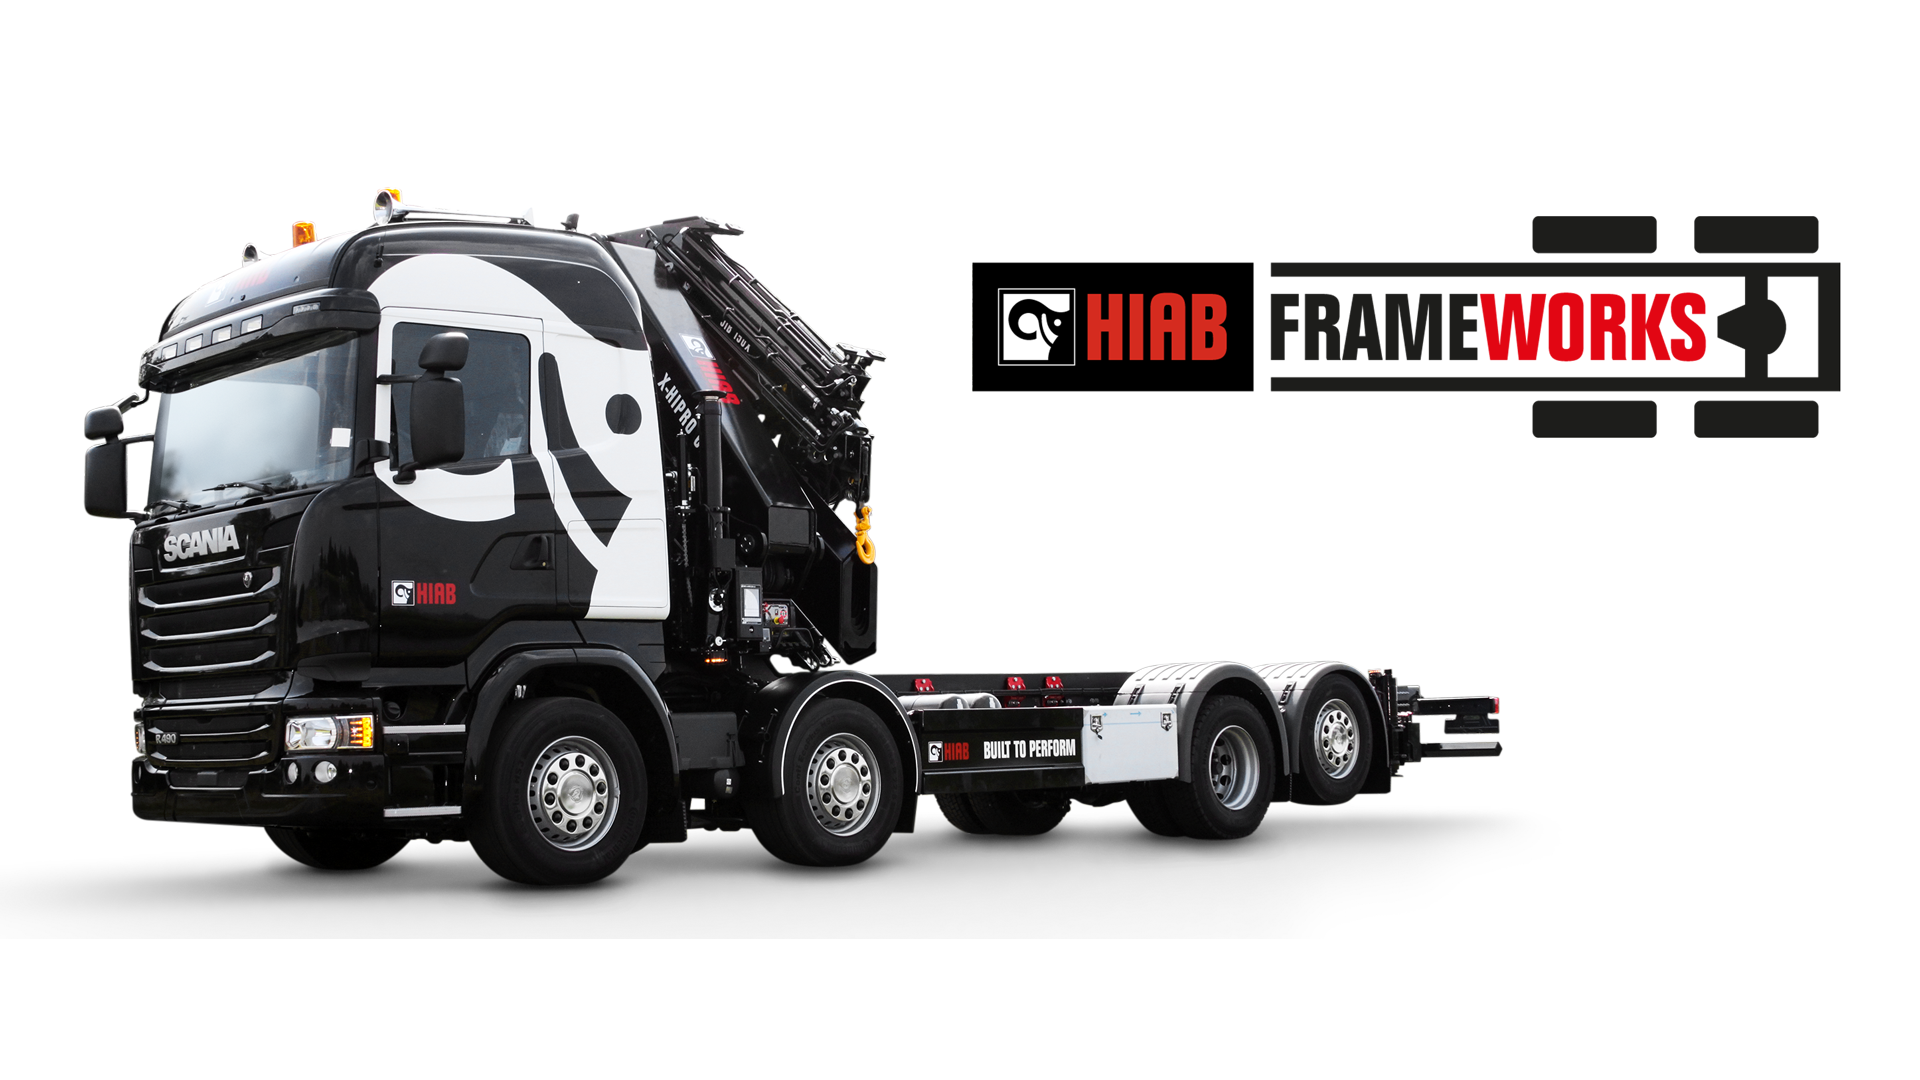 Loader Cranes with Superior Performance | Products | Hiab